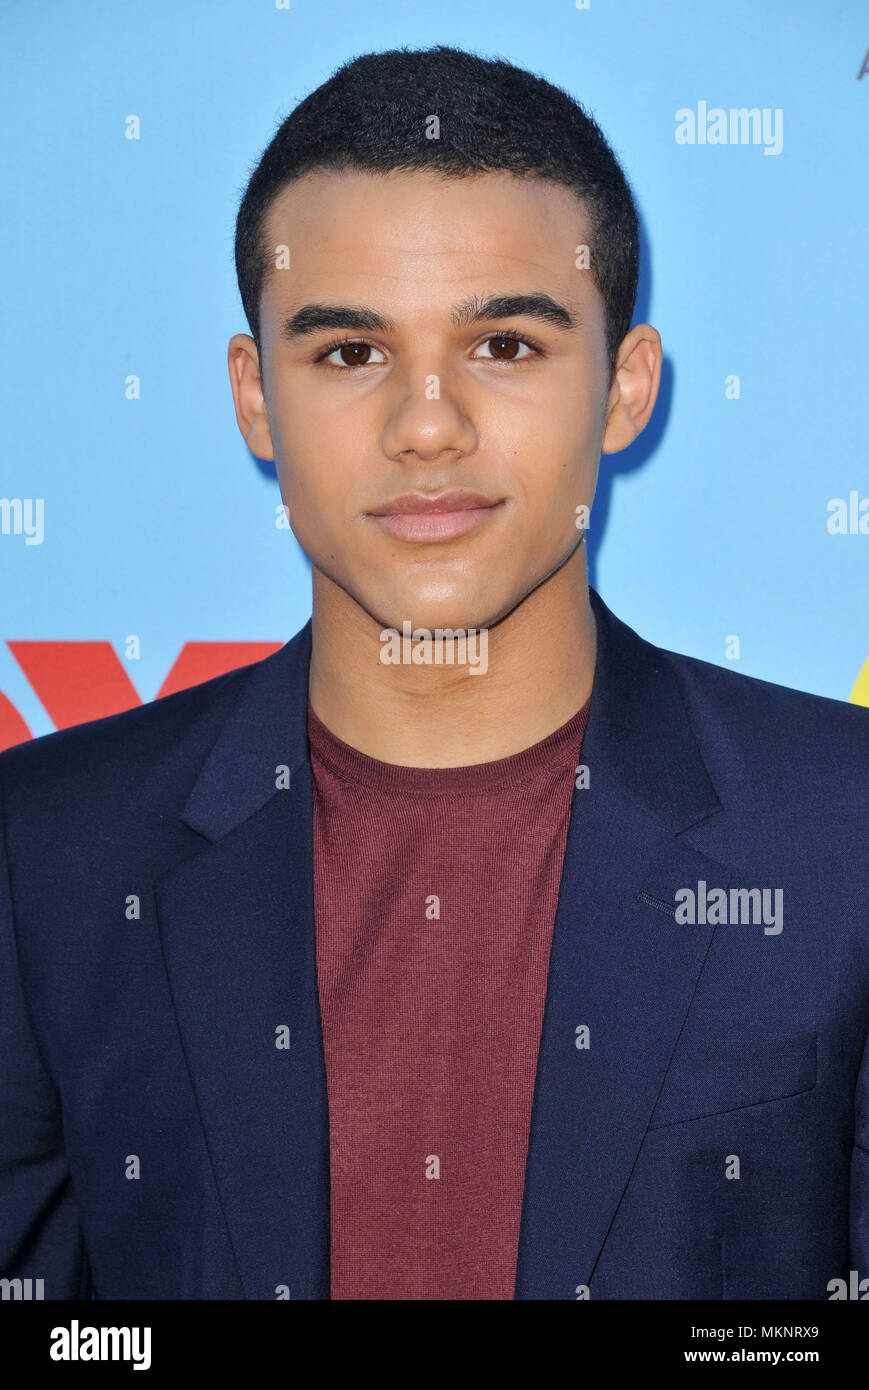 clip of jacob artist from blood money movie